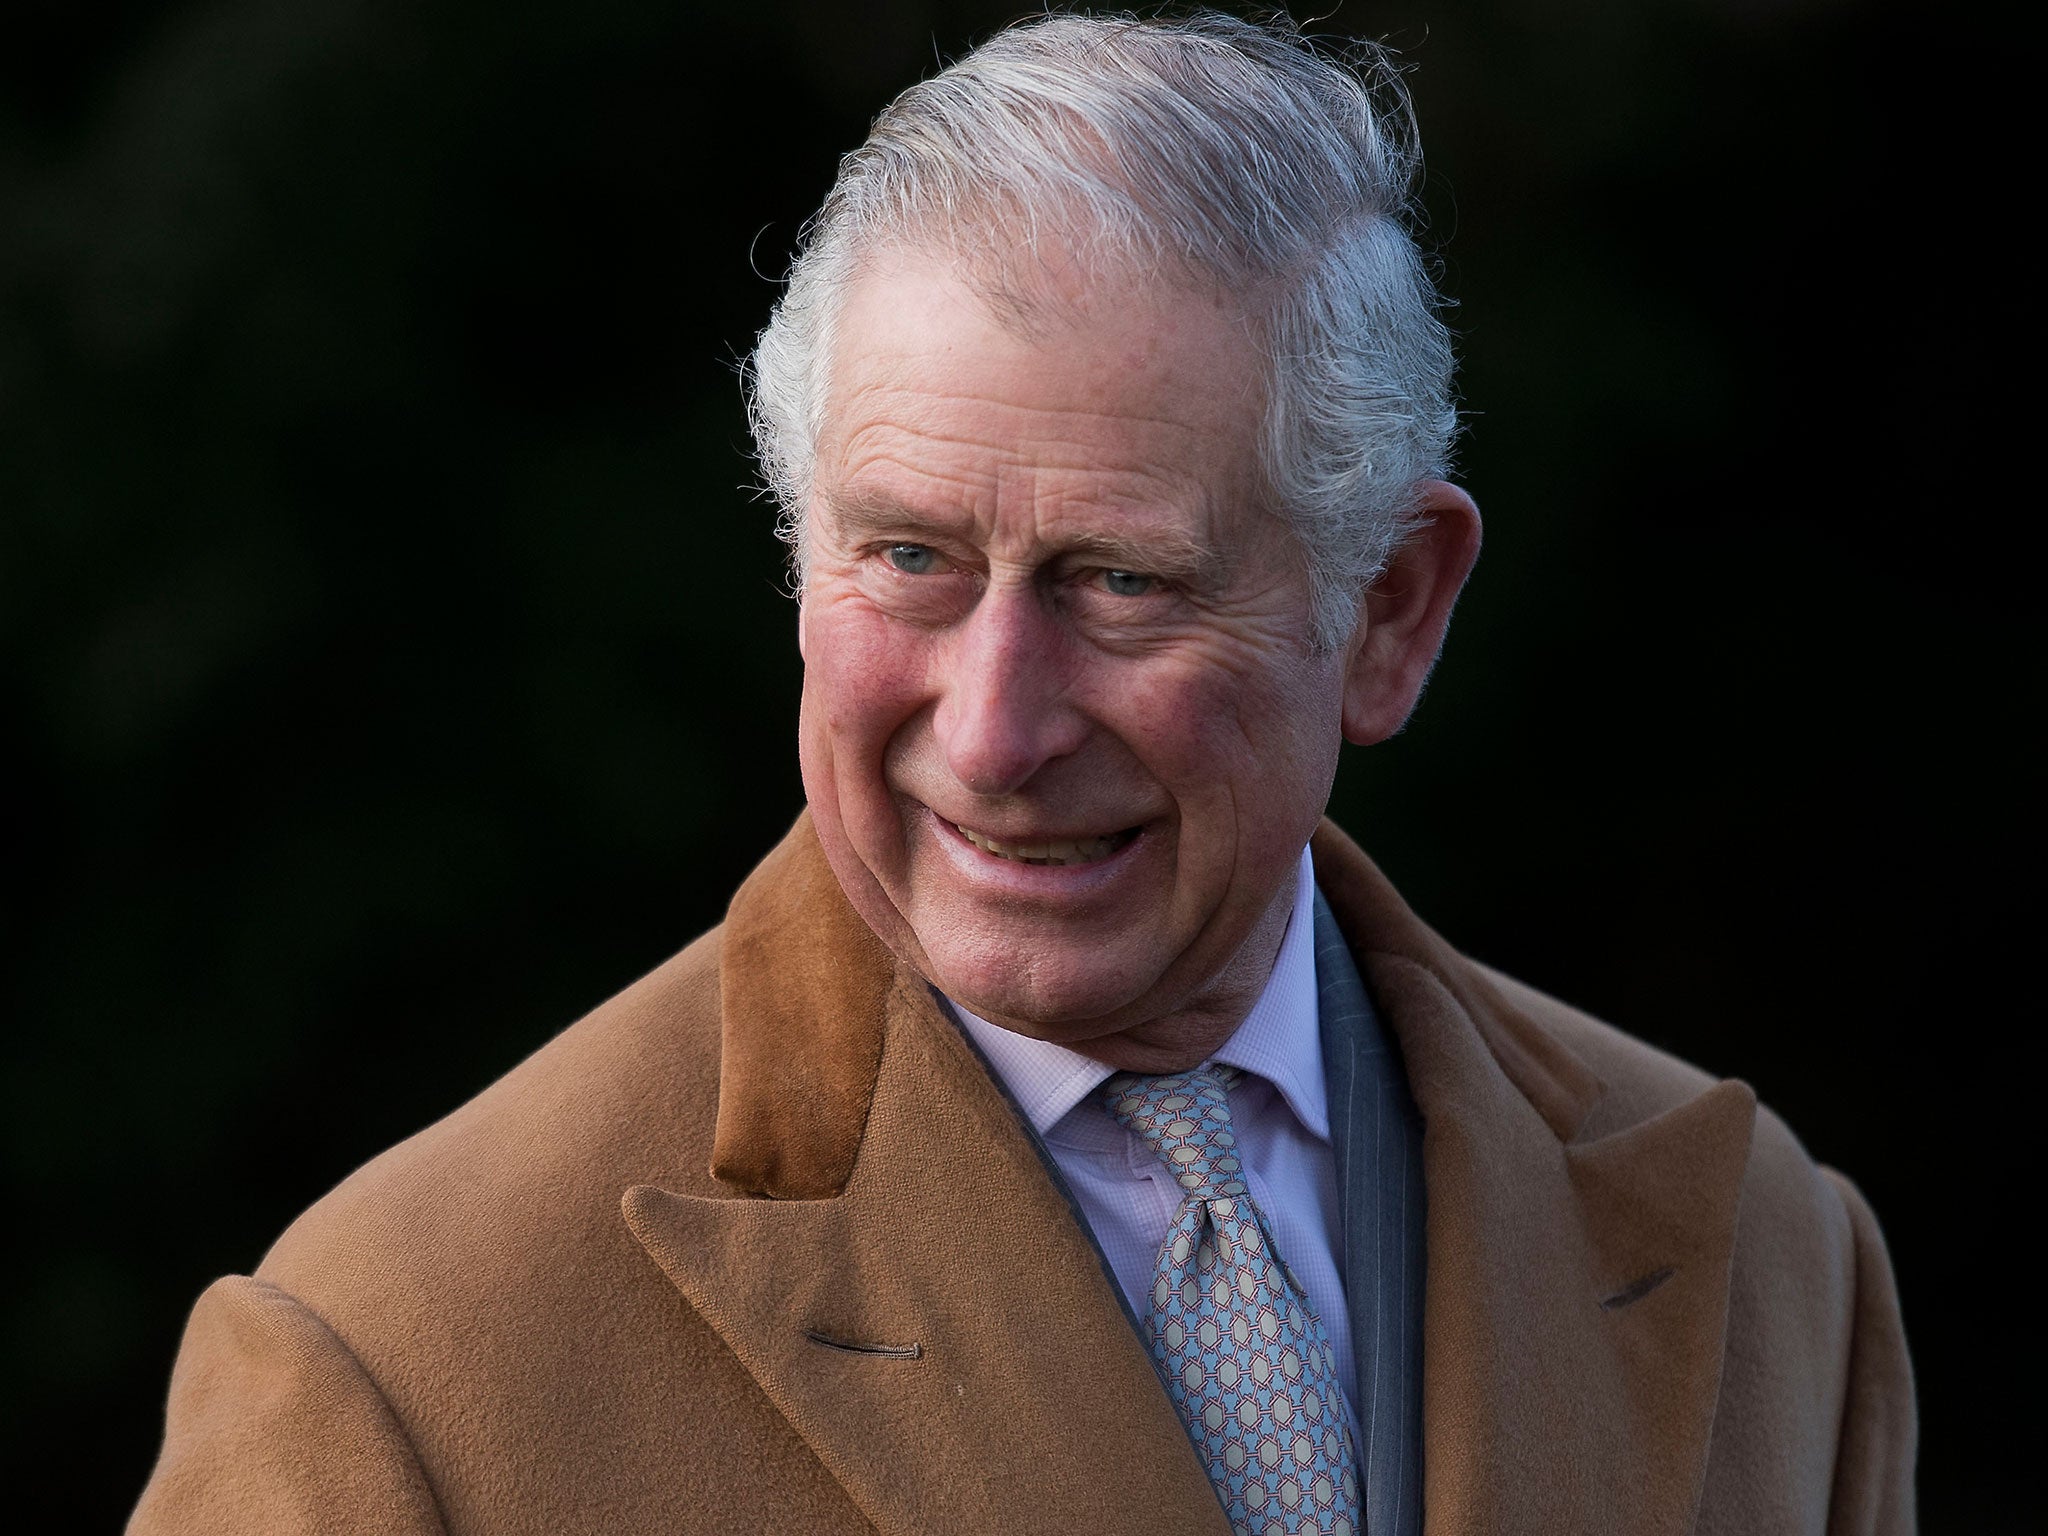 Prince Charles has campaigned on climate issues for decades